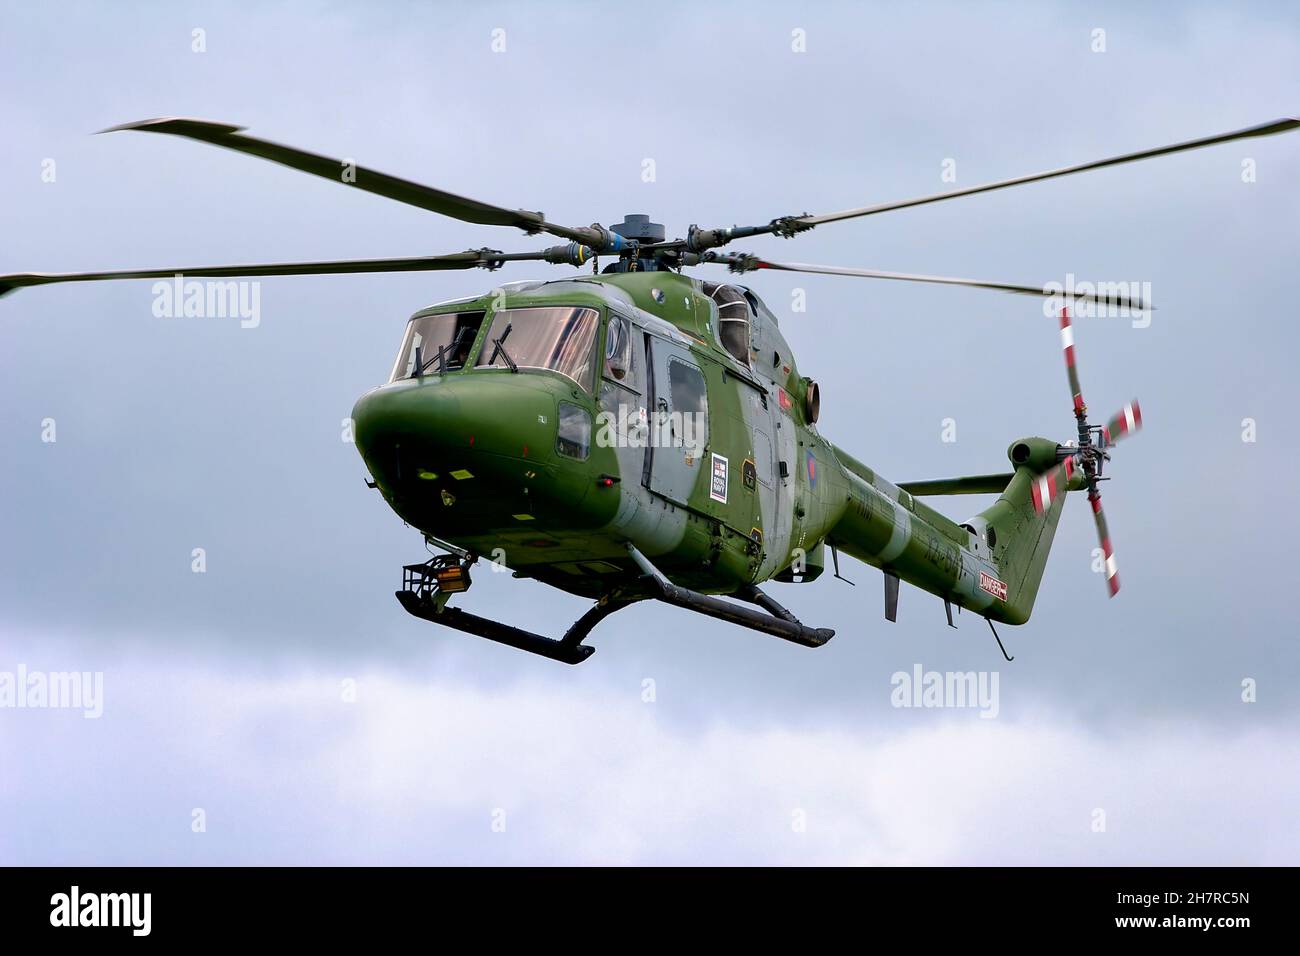 847 Naval Air Squadron, based at RNAS Yeovilton, Westland Lynx AH.7 helicopter, XZ641, used by the Royal Marines at the 2007 RNAS Yeovilton Air Day Stock Photo